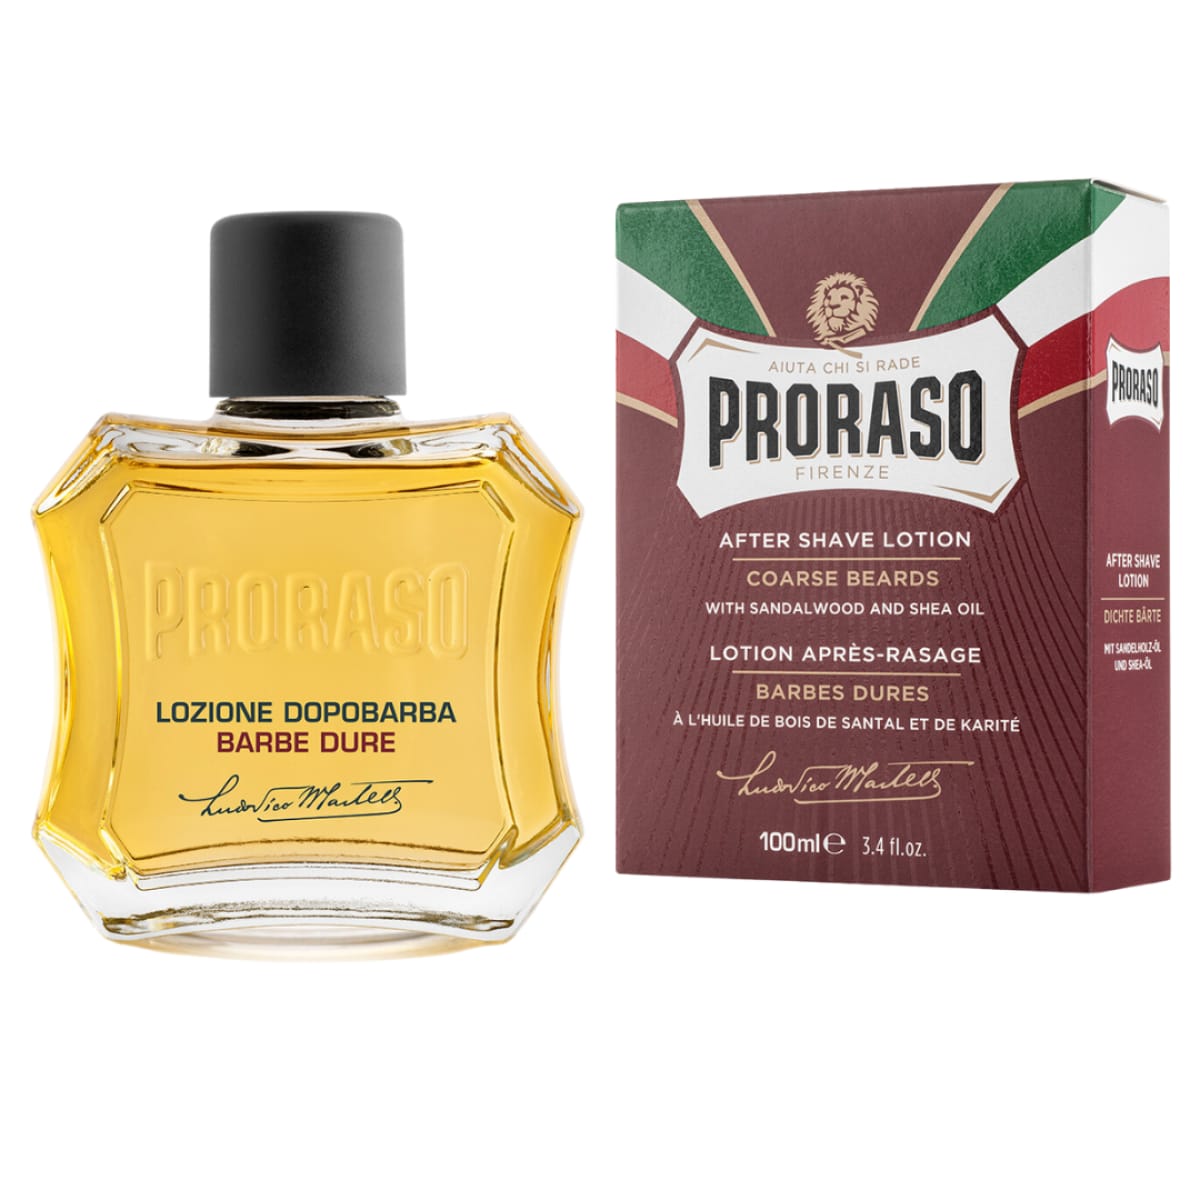 Proraso After Shave Lotion Nourishing Sandalwood & Shea Oil